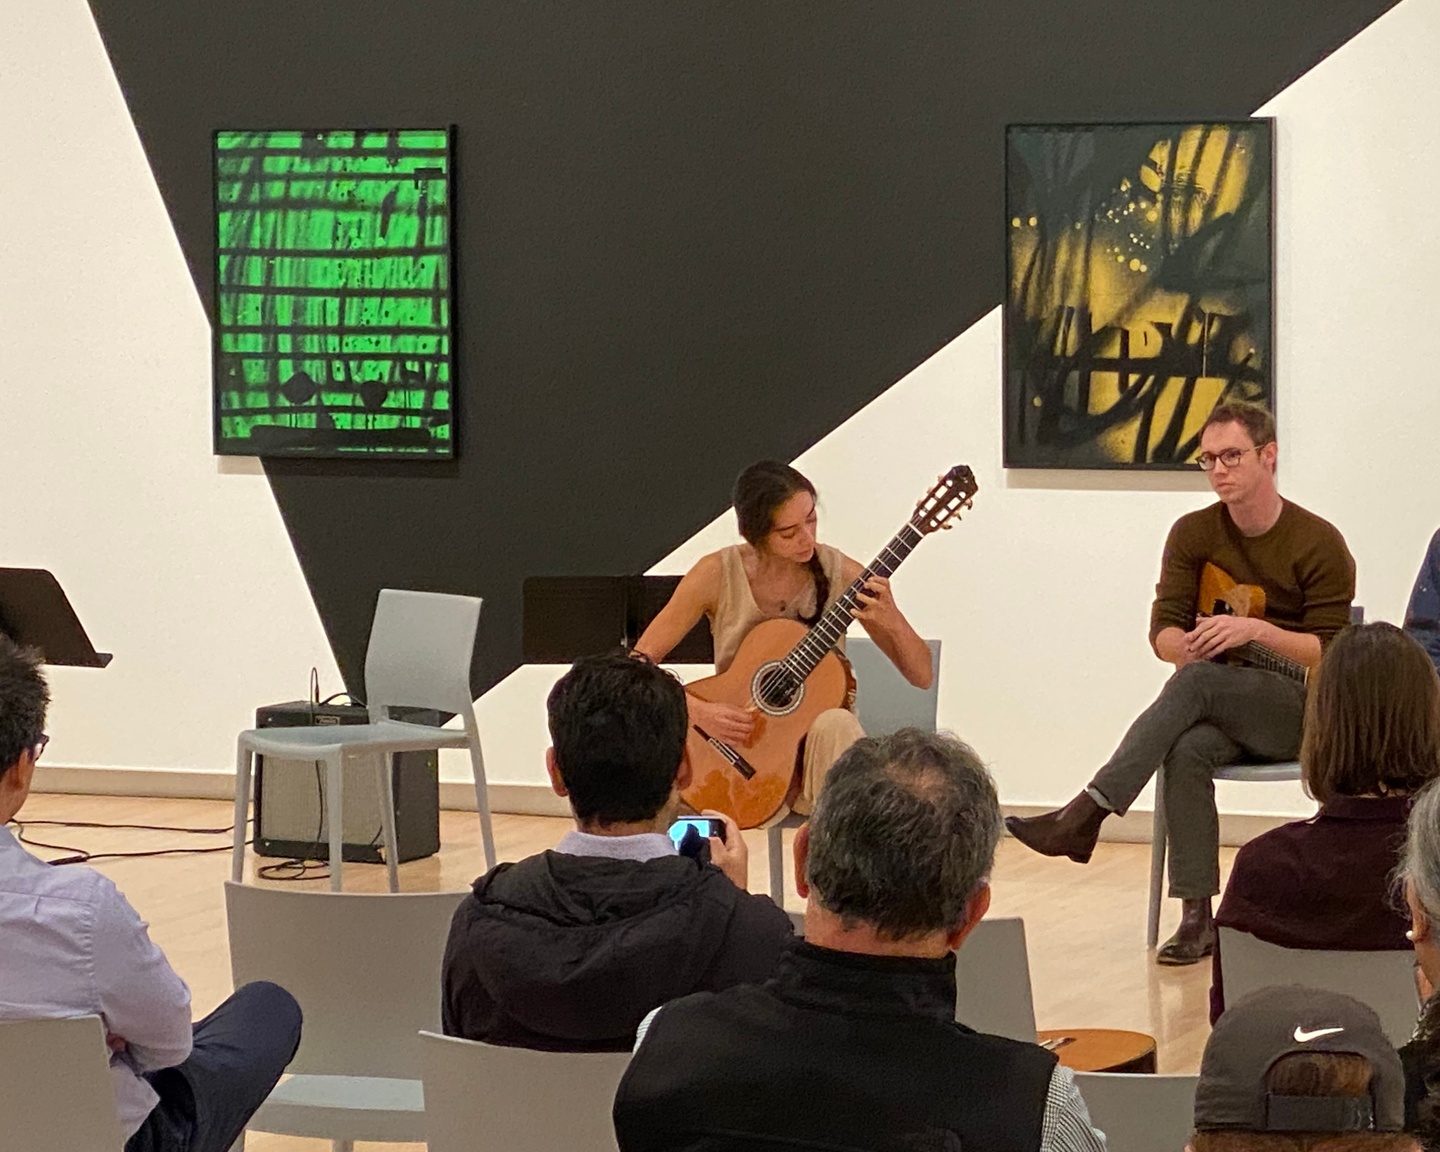 A person plays guitar in front of a wall with paintings and a black triangle painted on it, while other people look on